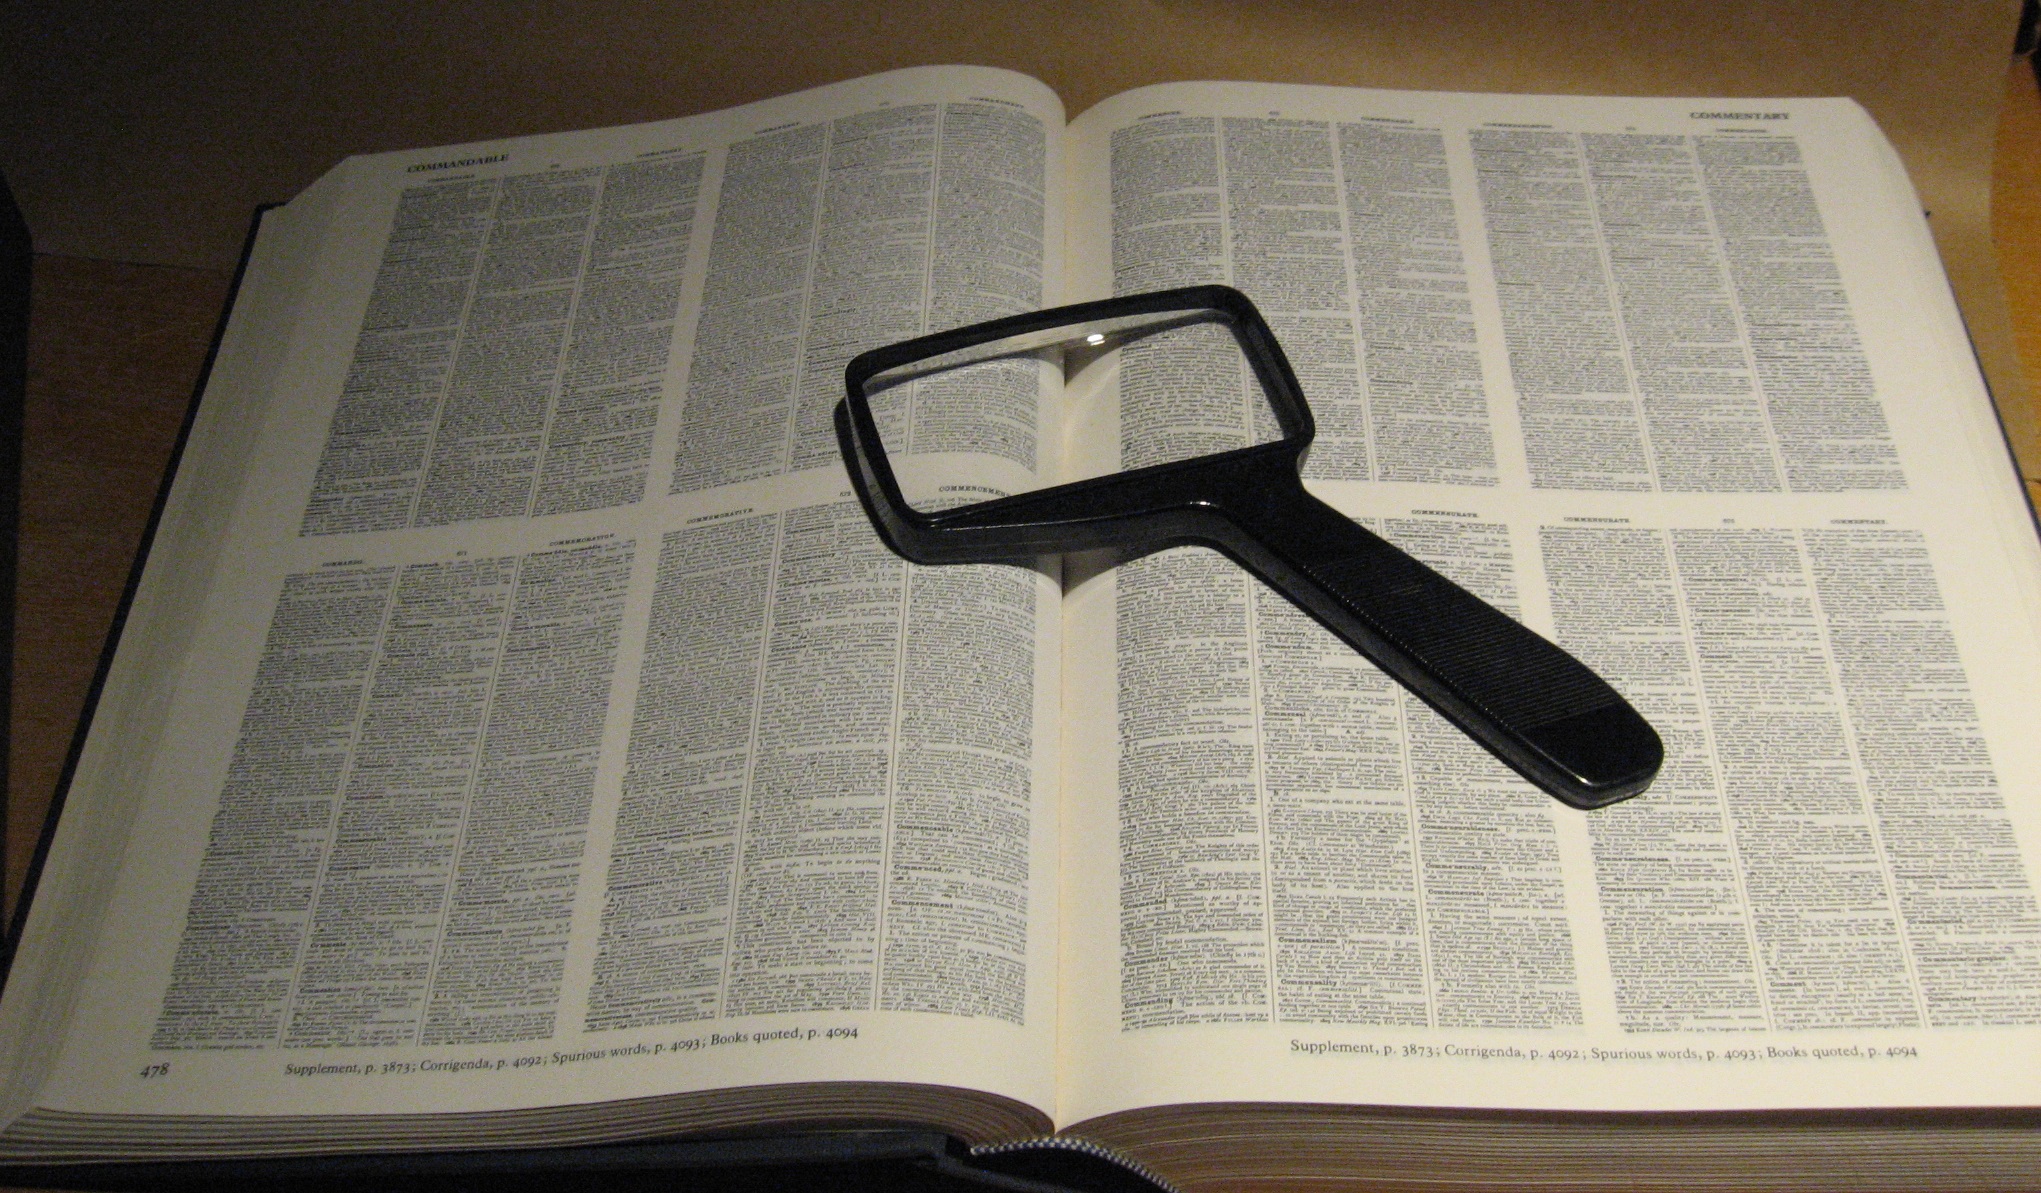 The Compact Edition of the Oxford English Dictionary: Complete Text  Reproduced Micrographically (2 Volumes in a Slipcase, with Magnifying Glass)